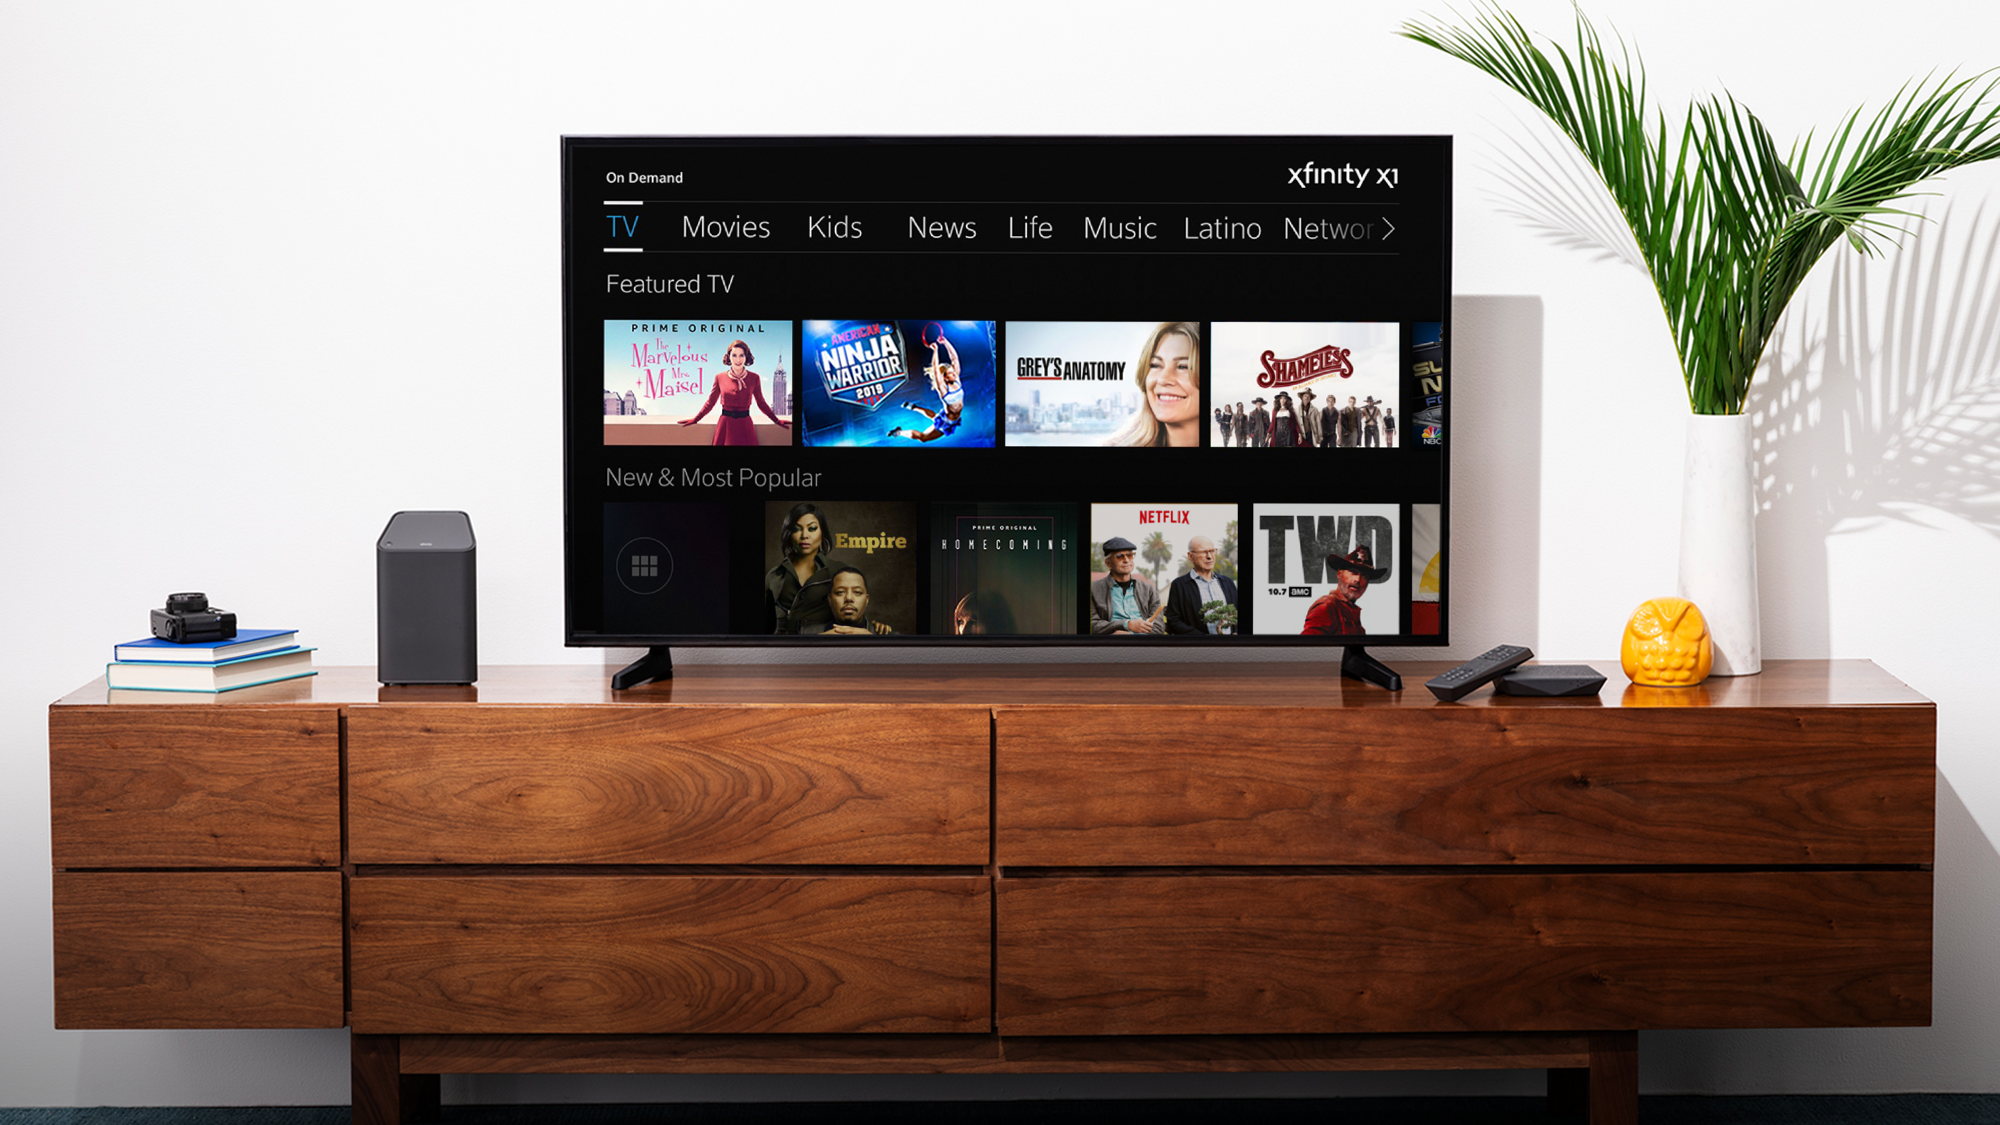 Comcast is looking to enter the smart TV wars